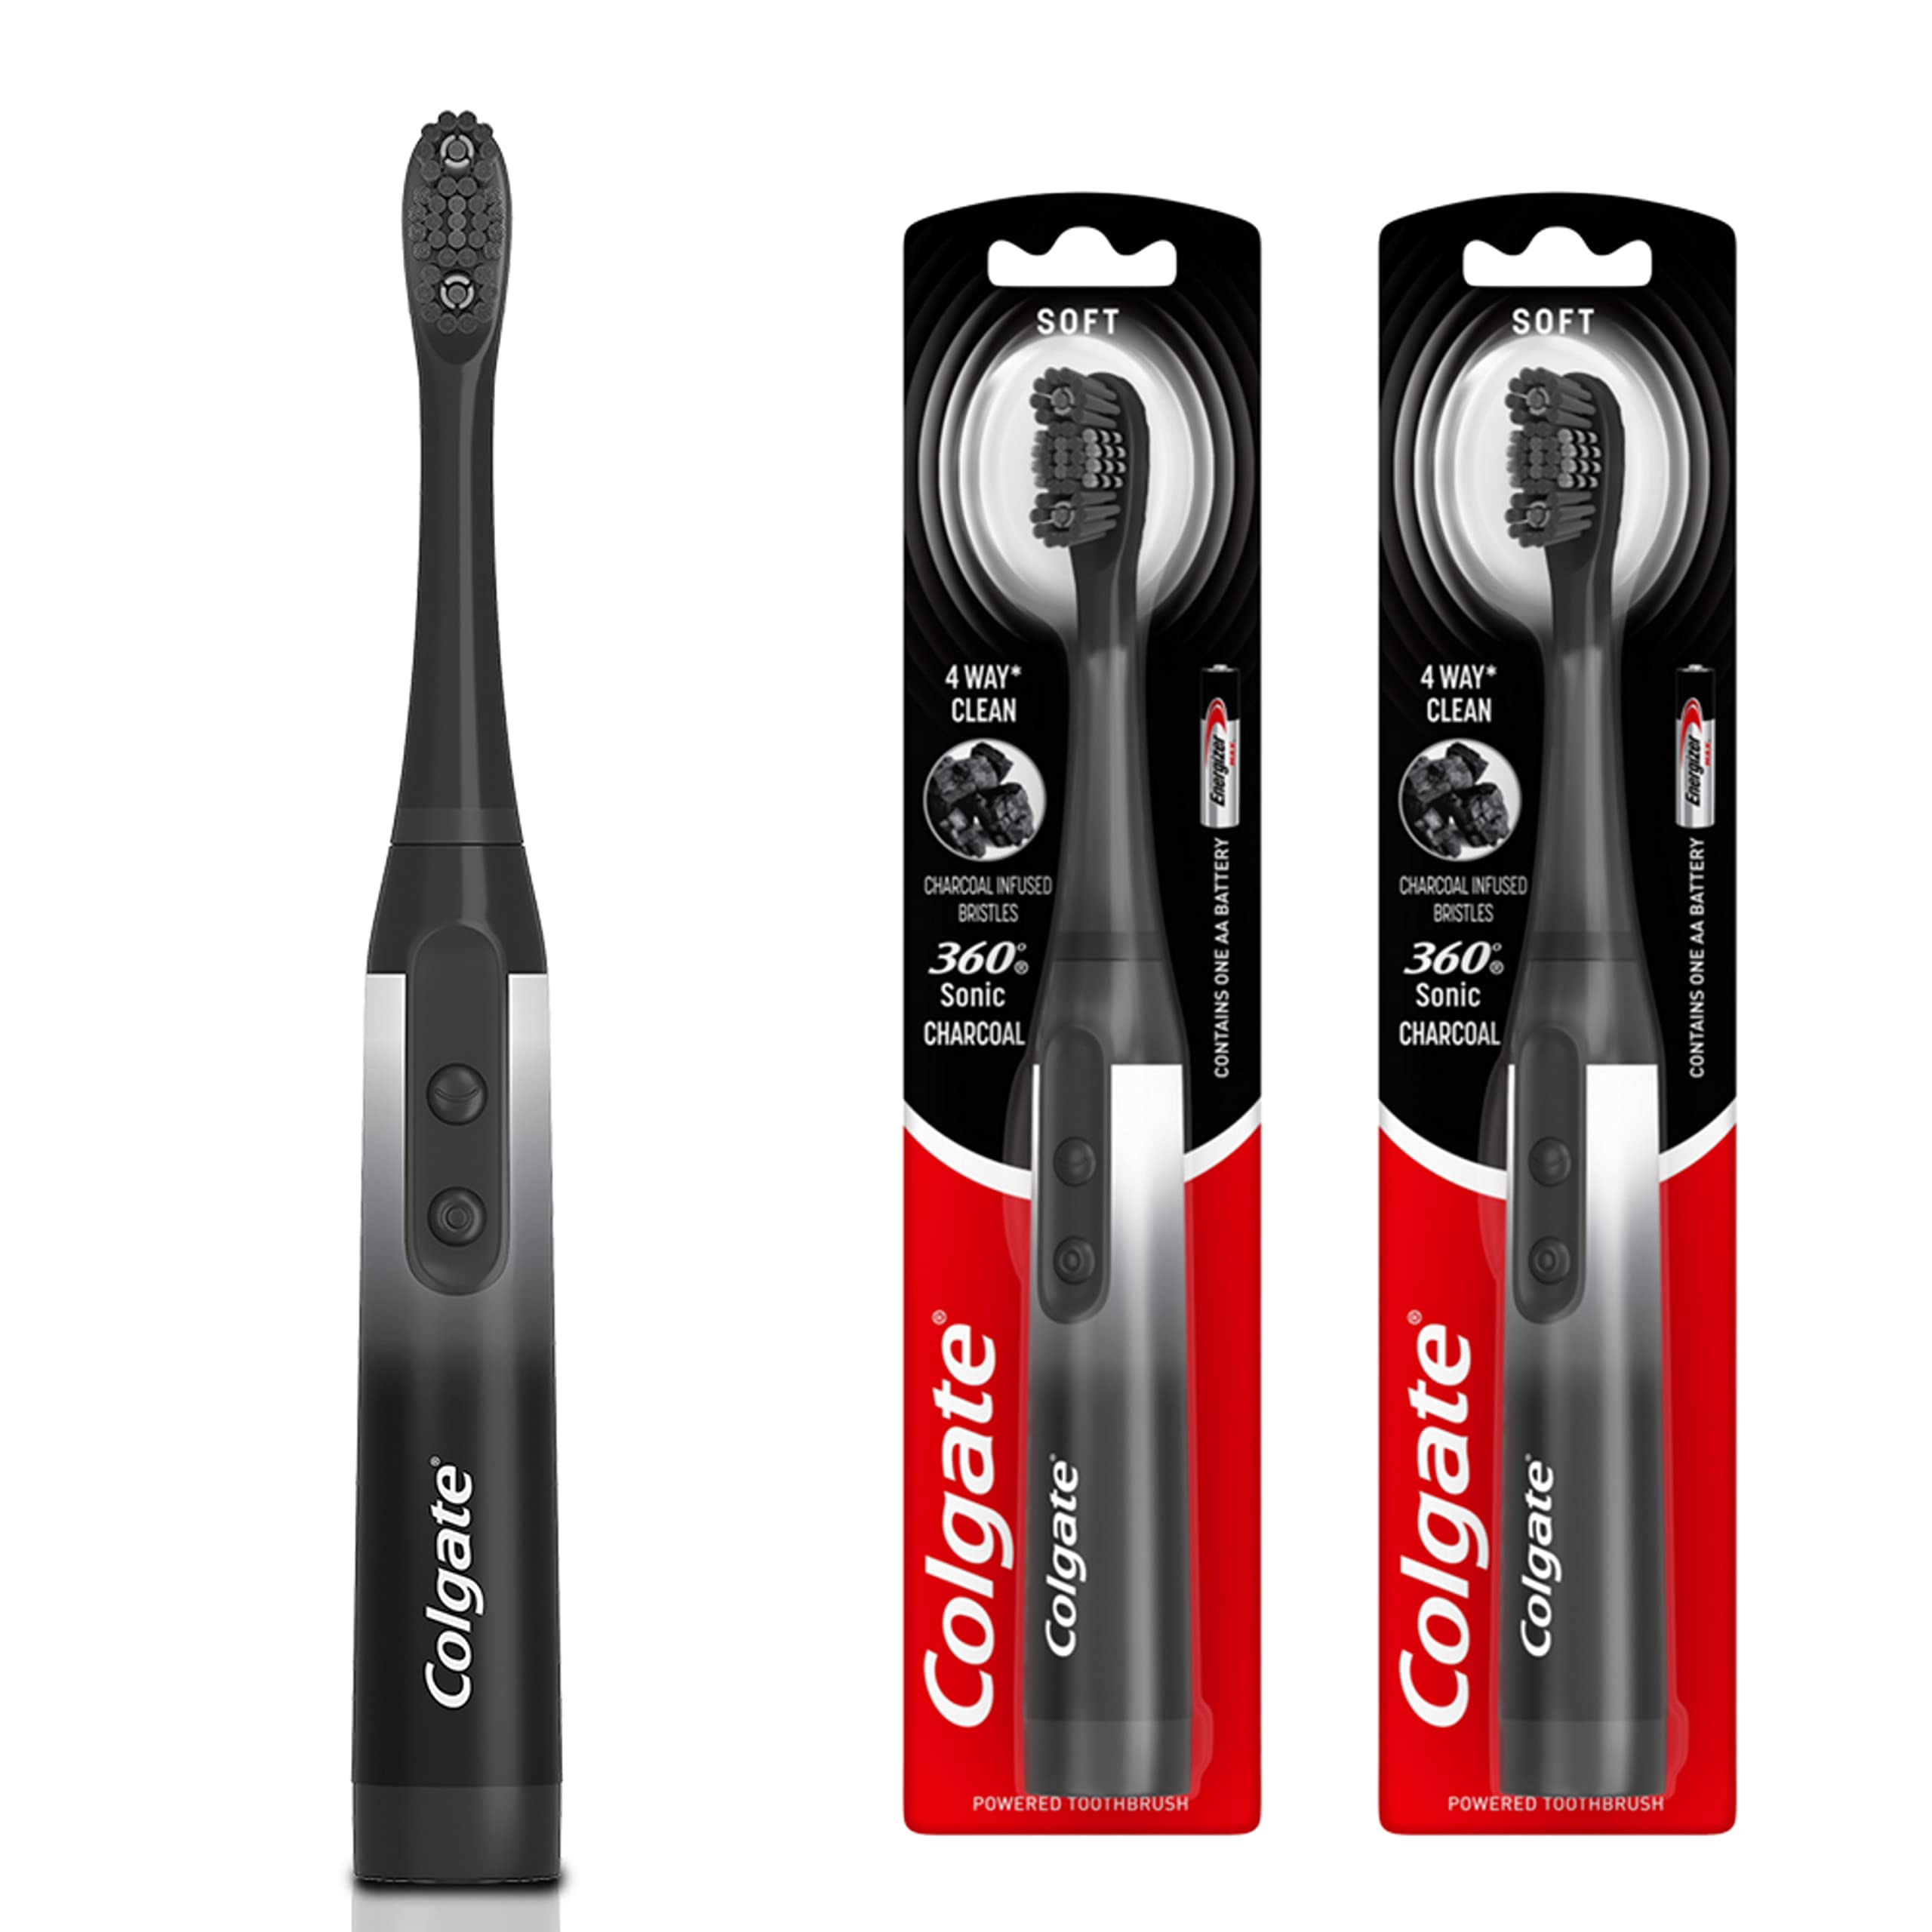 Colgate 360 Charcoal Sonic Powered Battery Toothbrush, 2 Pack $7.98